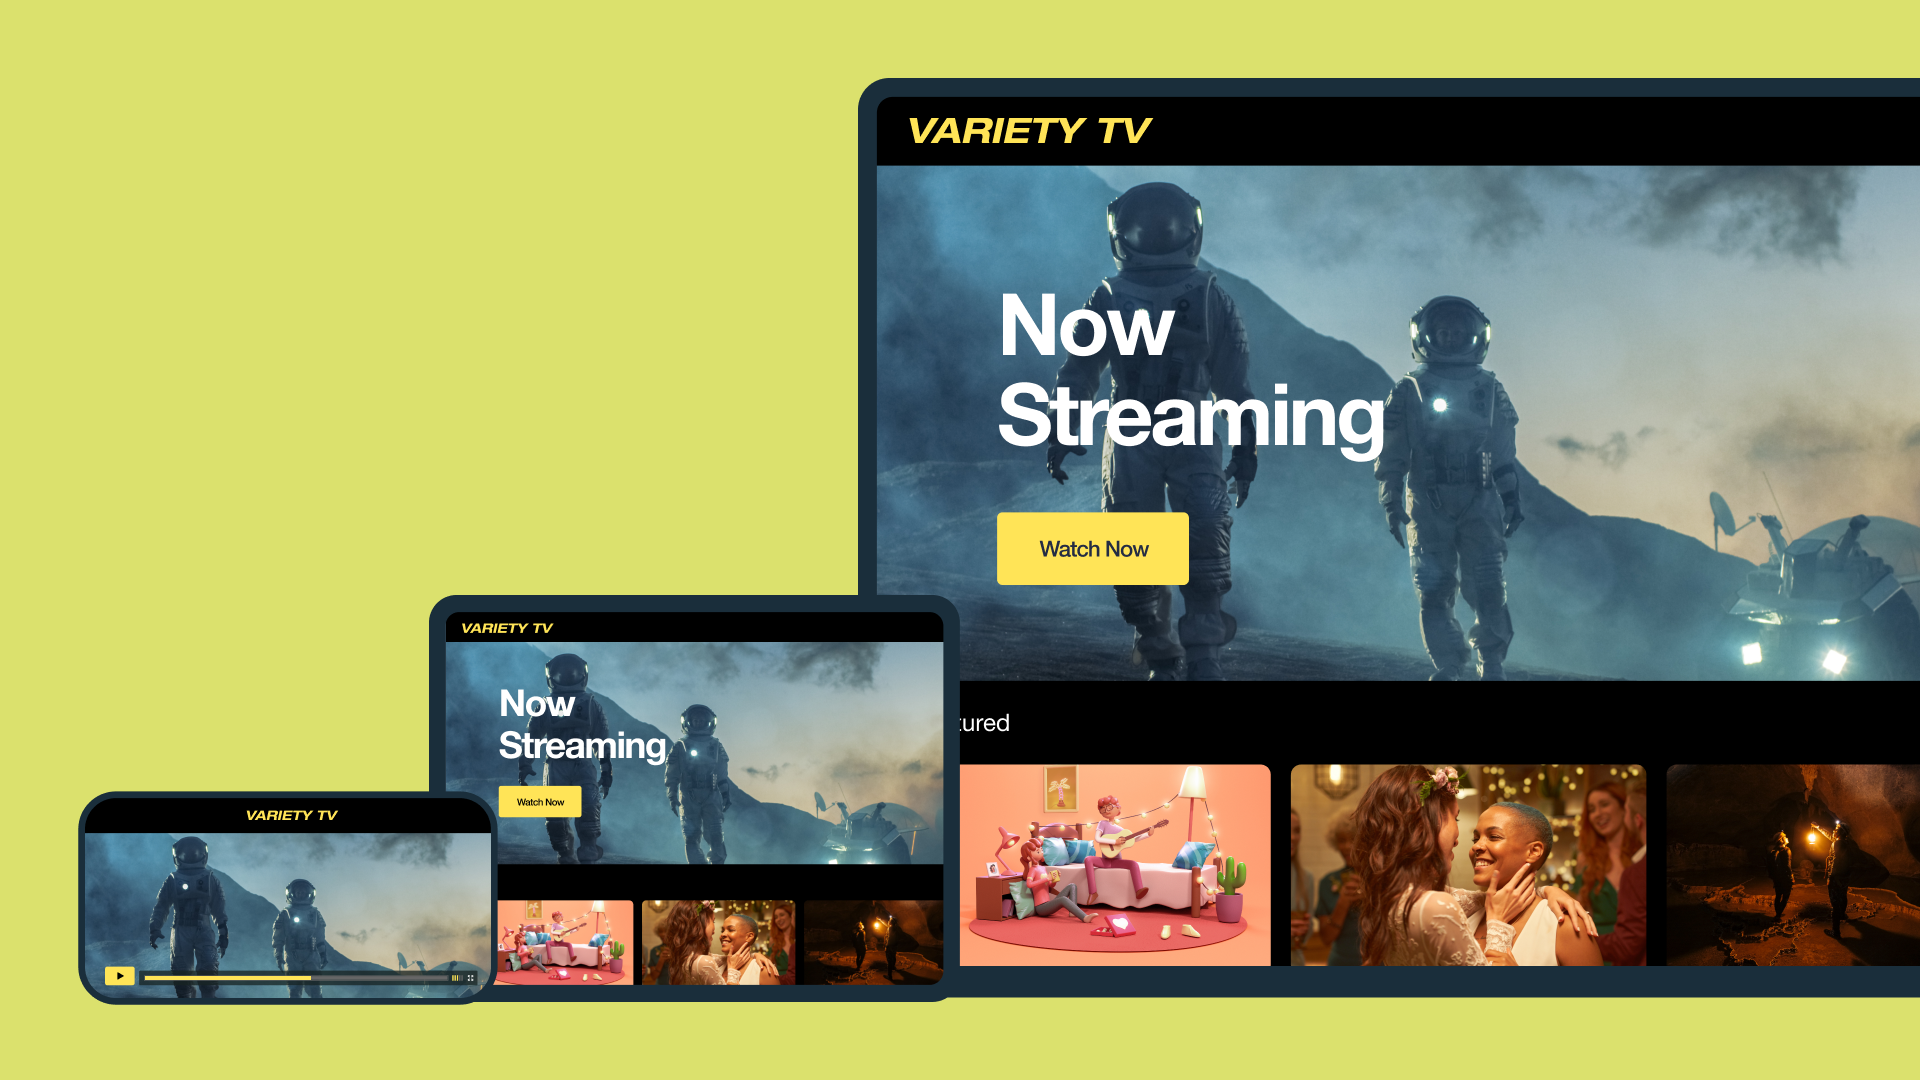 The Future of CTV – FAST Channels and AVOD will only survive on integrated platforms that mirror the success of YouTube, Spotify and Twitch